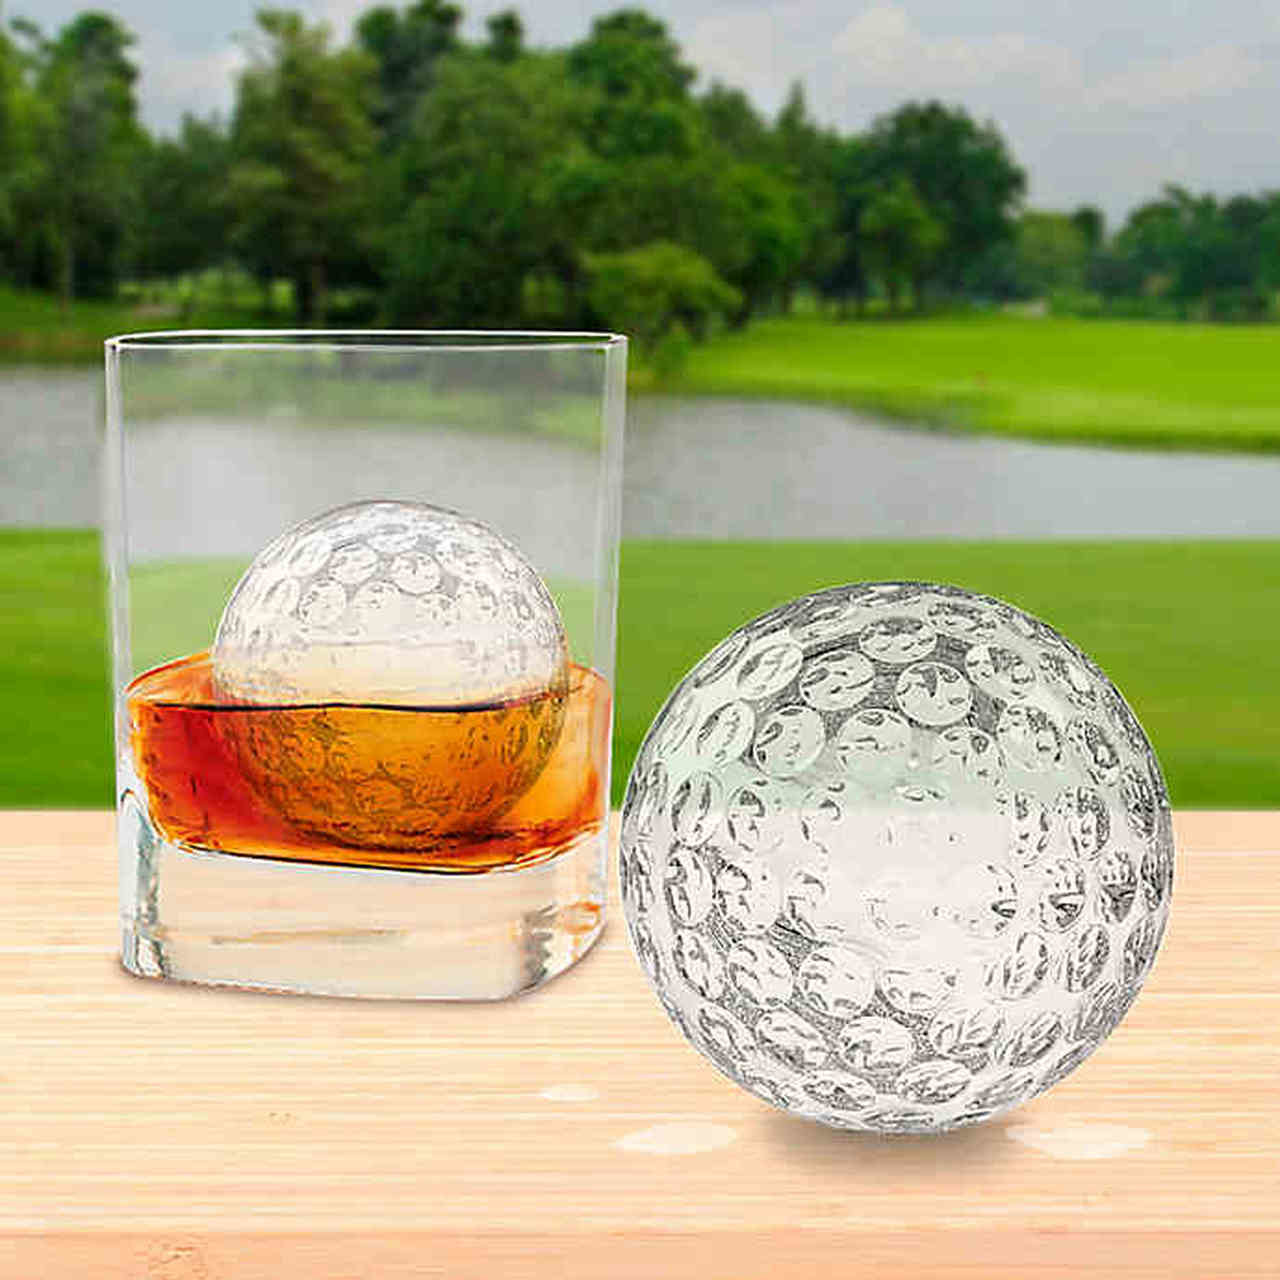 Tovolo Golf Ball Ice Cube Mold - Spoons N Spice